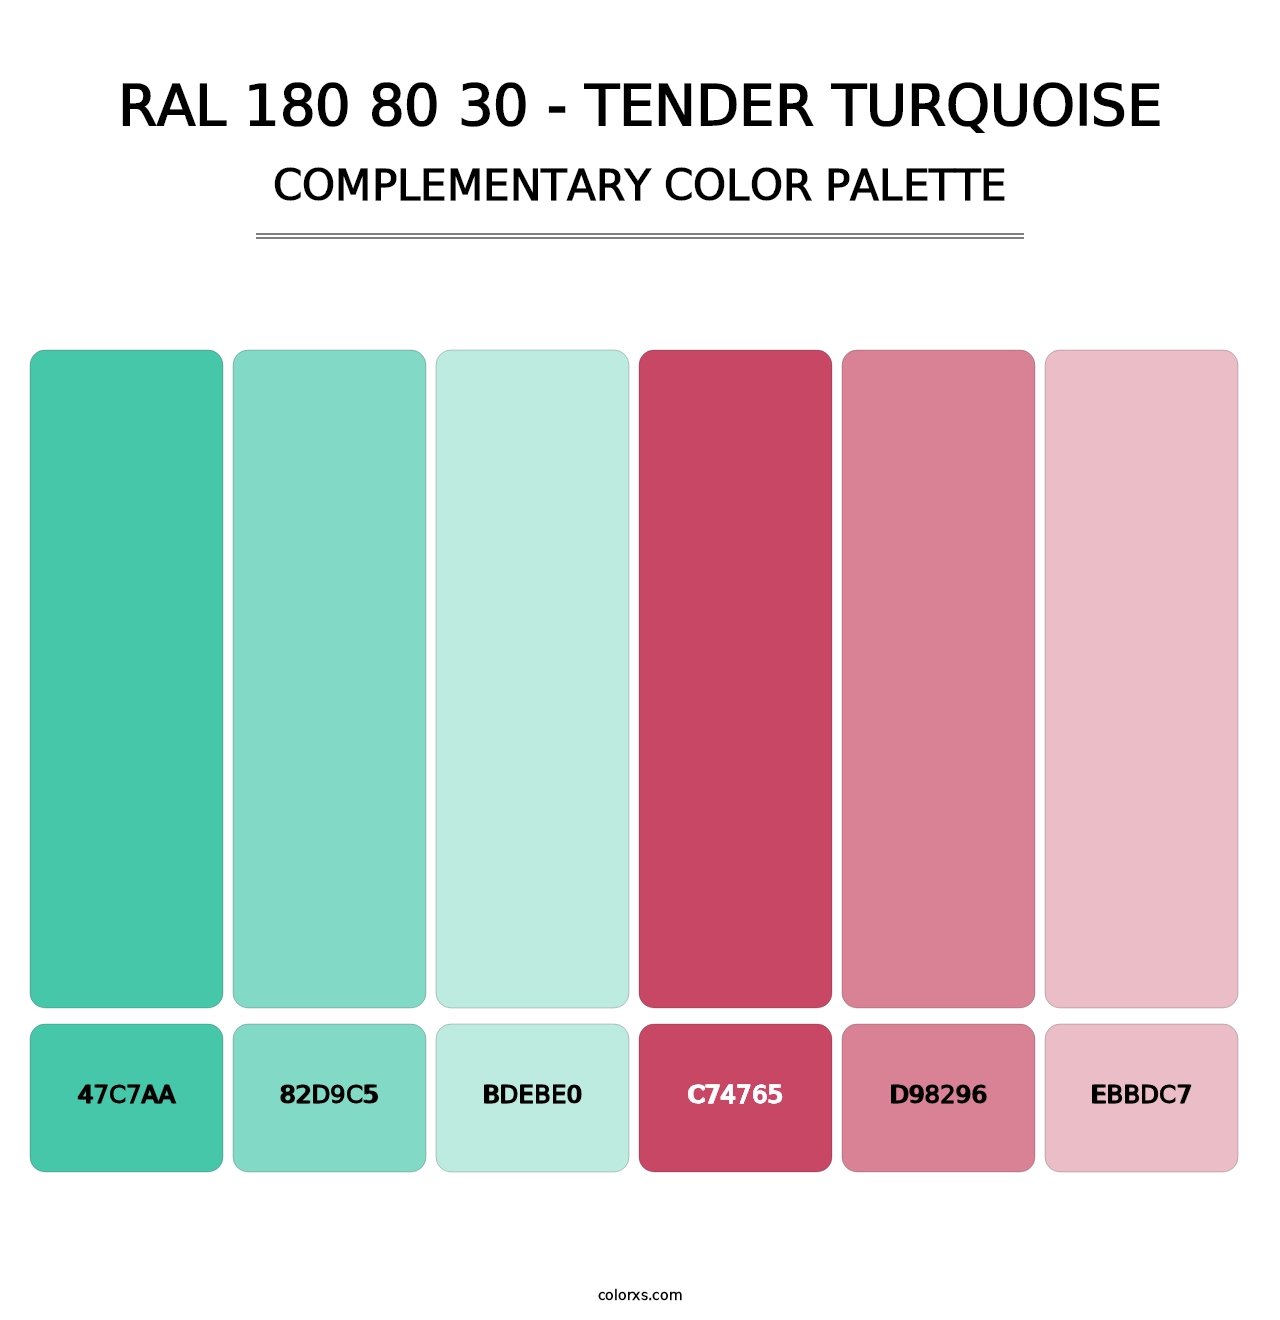 RAL 180 80 30 - Tender Turquoise - Complementary Color Palette